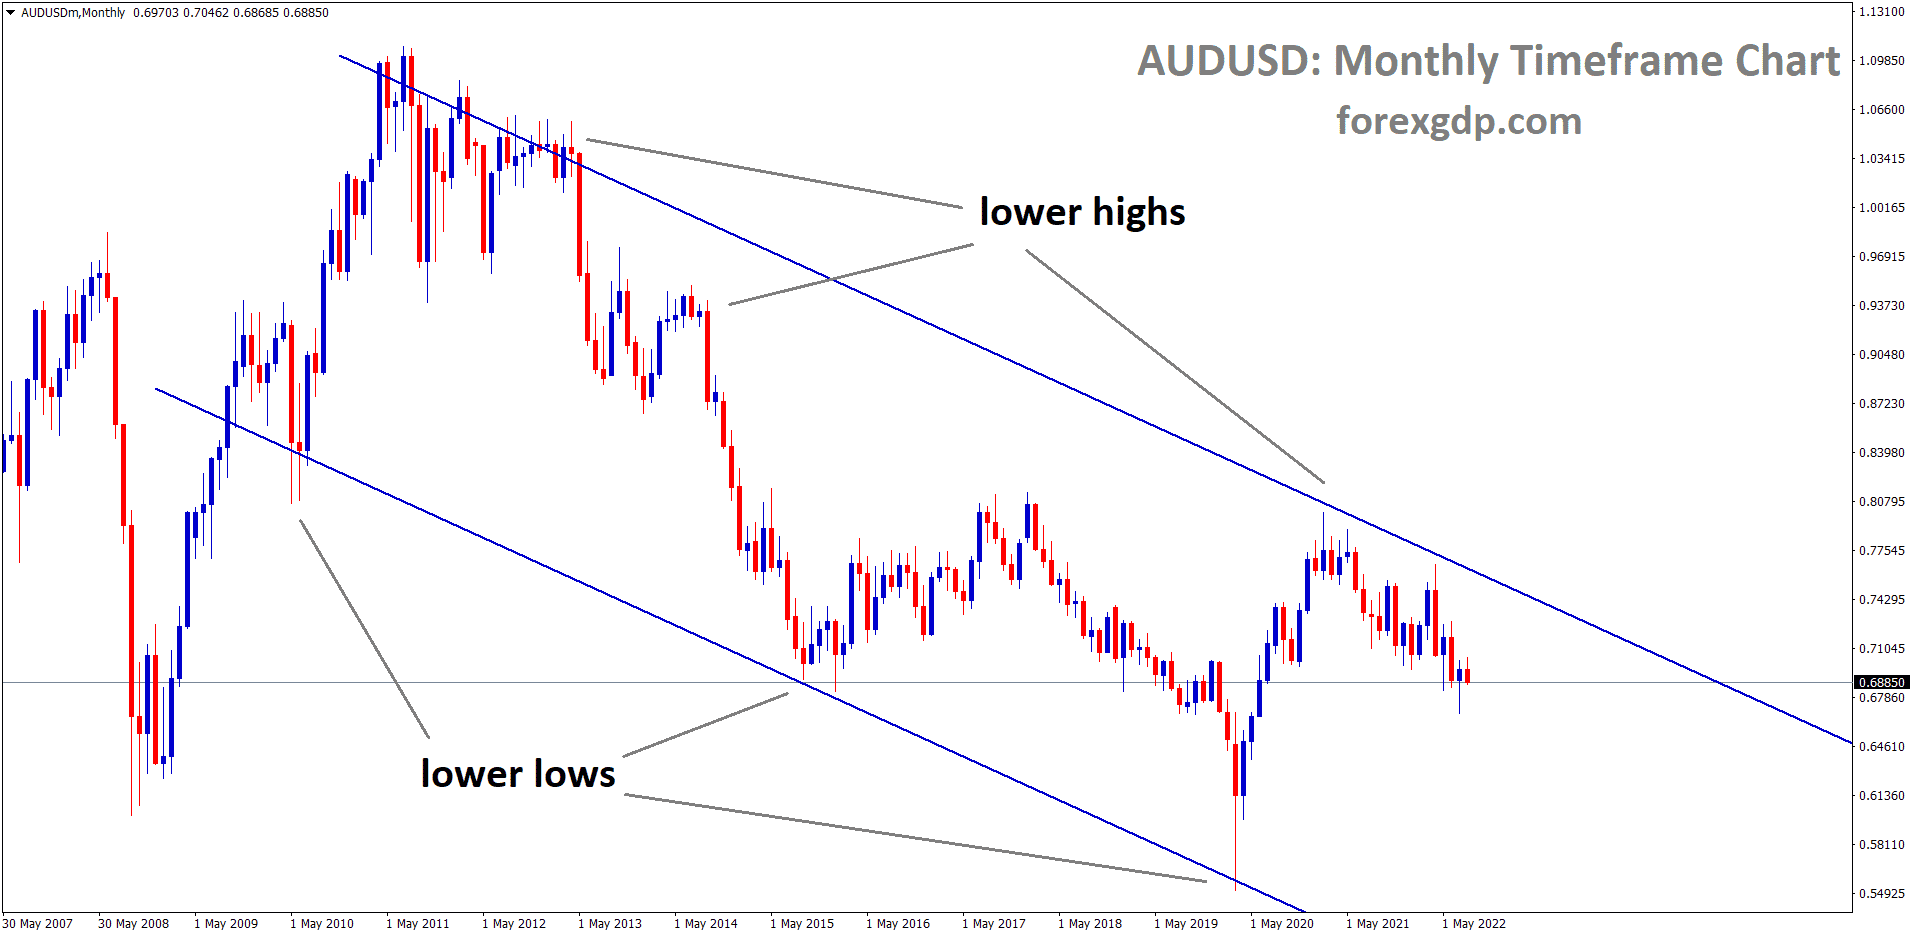 AUDUSD currency pair down trend analysis